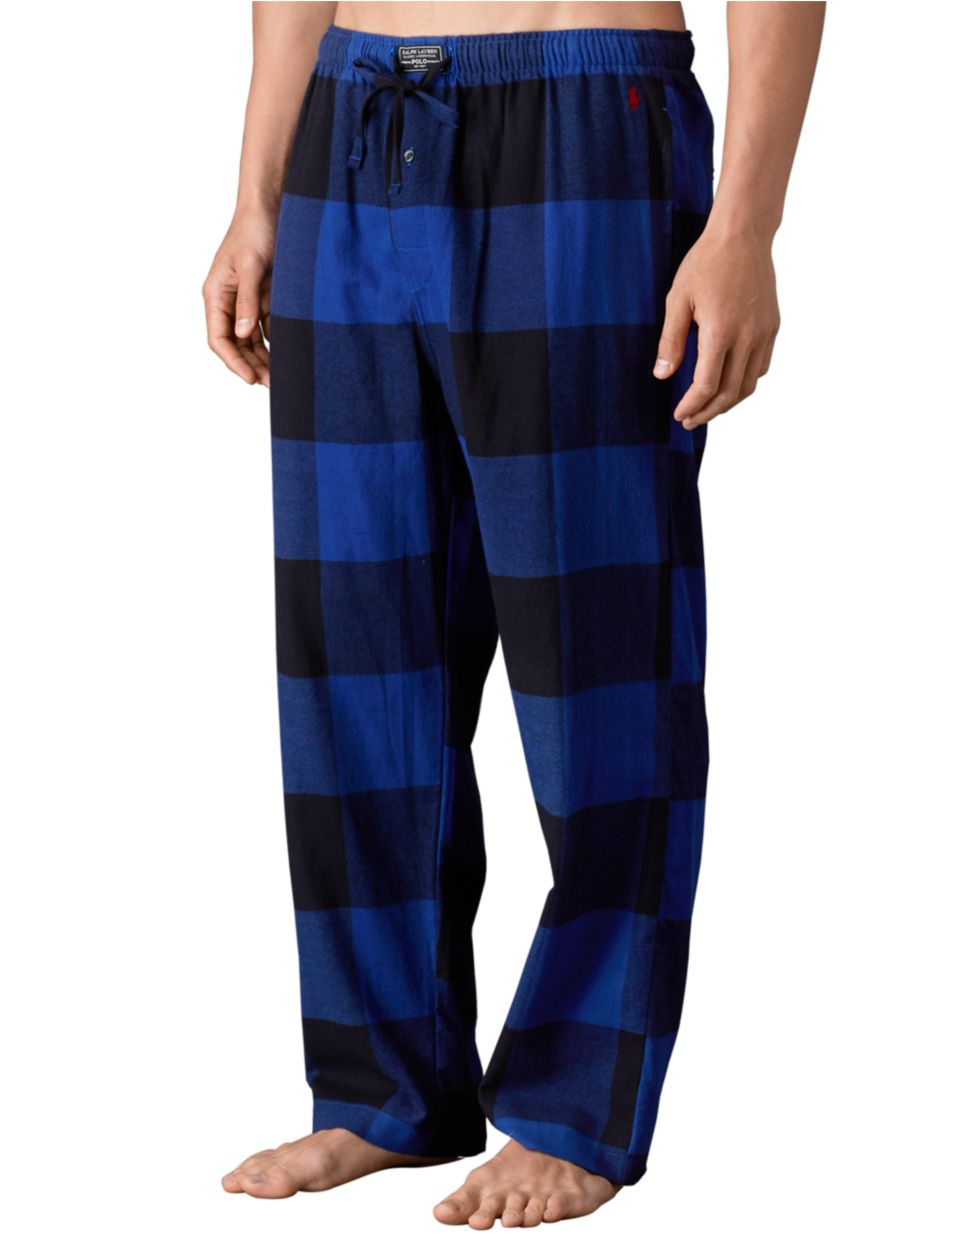 Polo Ralph Lauren Buffalo Check Flannel Pajama Pants in Blue for Men - Lyst